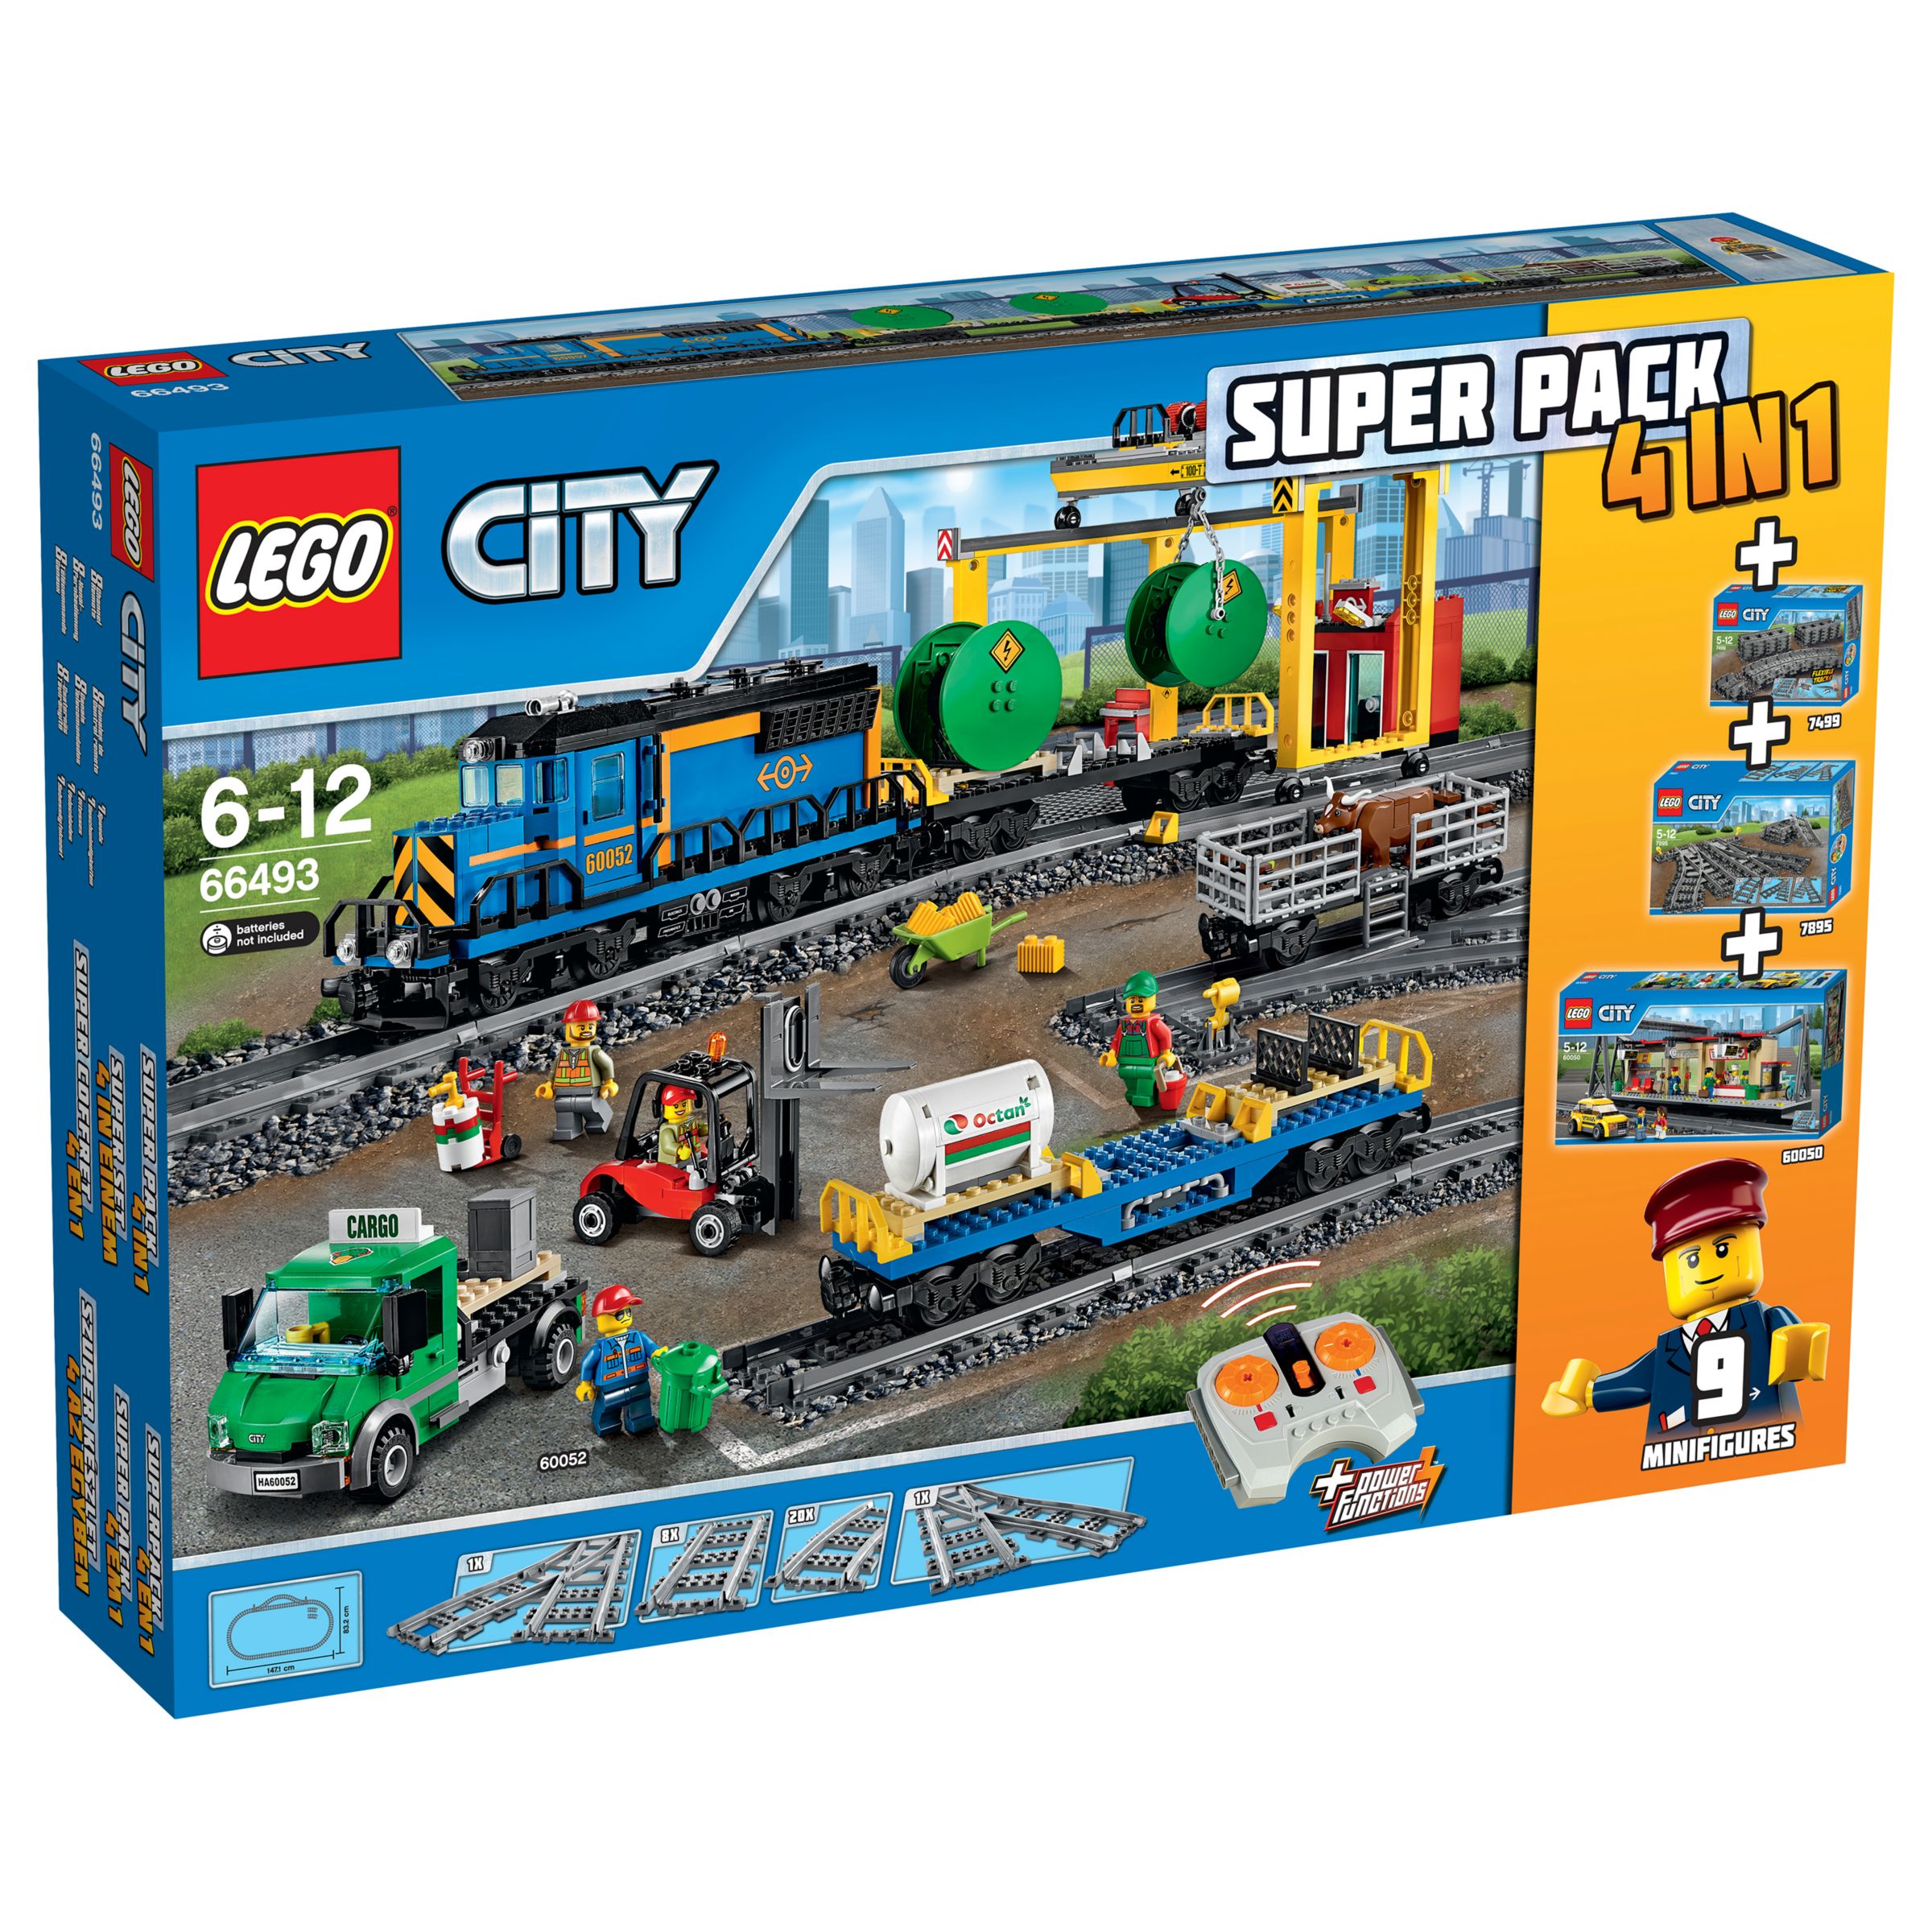 LEGO City 66493 Remote Control Cargo Train, Station, Tracks and Power Functions 4 in 1 Super Pack